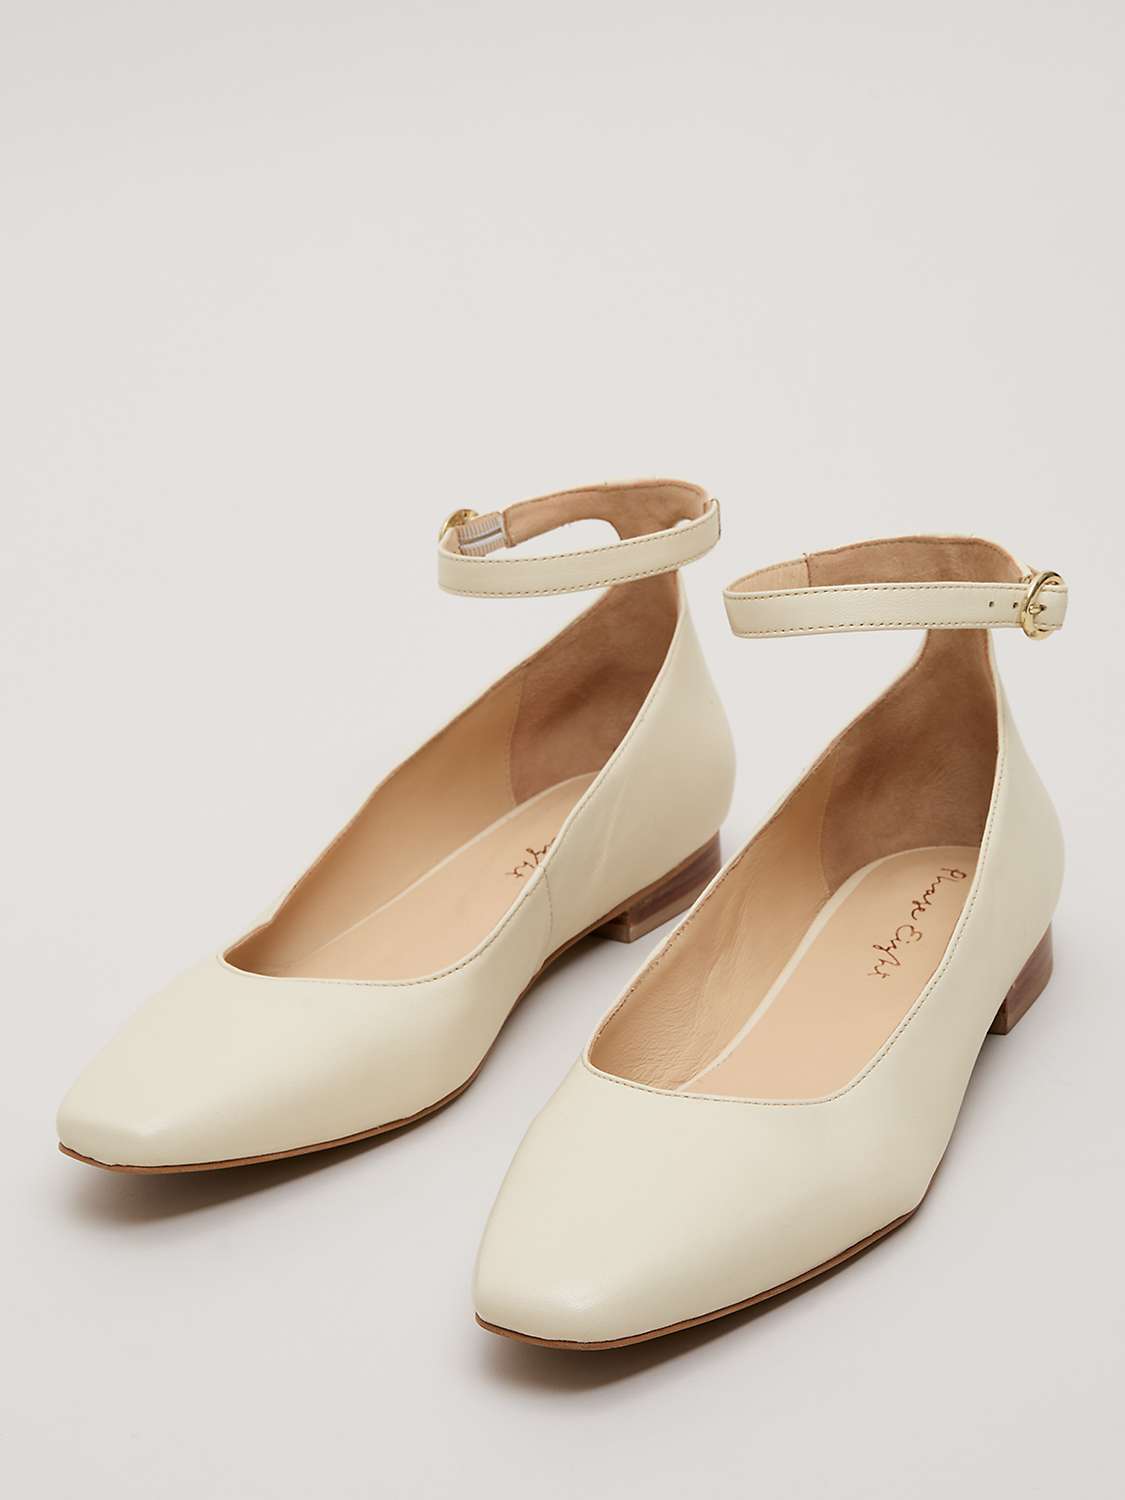 Buy Phase Eight Leather Almond Toe Ballerina Pumps, Neutral Online at johnlewis.com